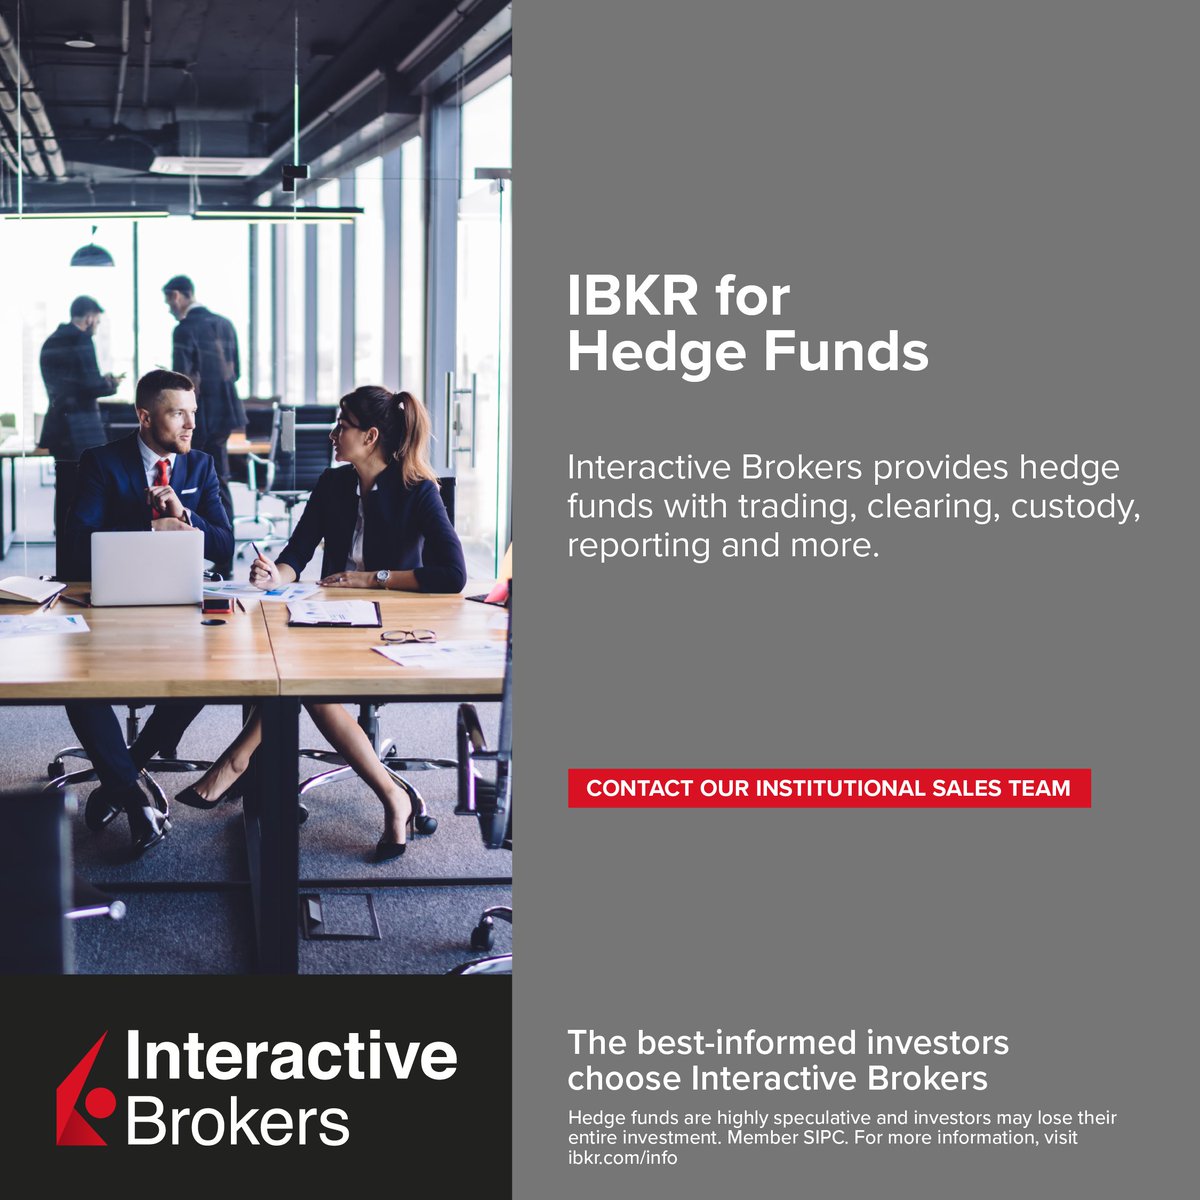 More #HedgeFunds are choosing Interactive Brokers. Learn why: spr.ly/hfgt